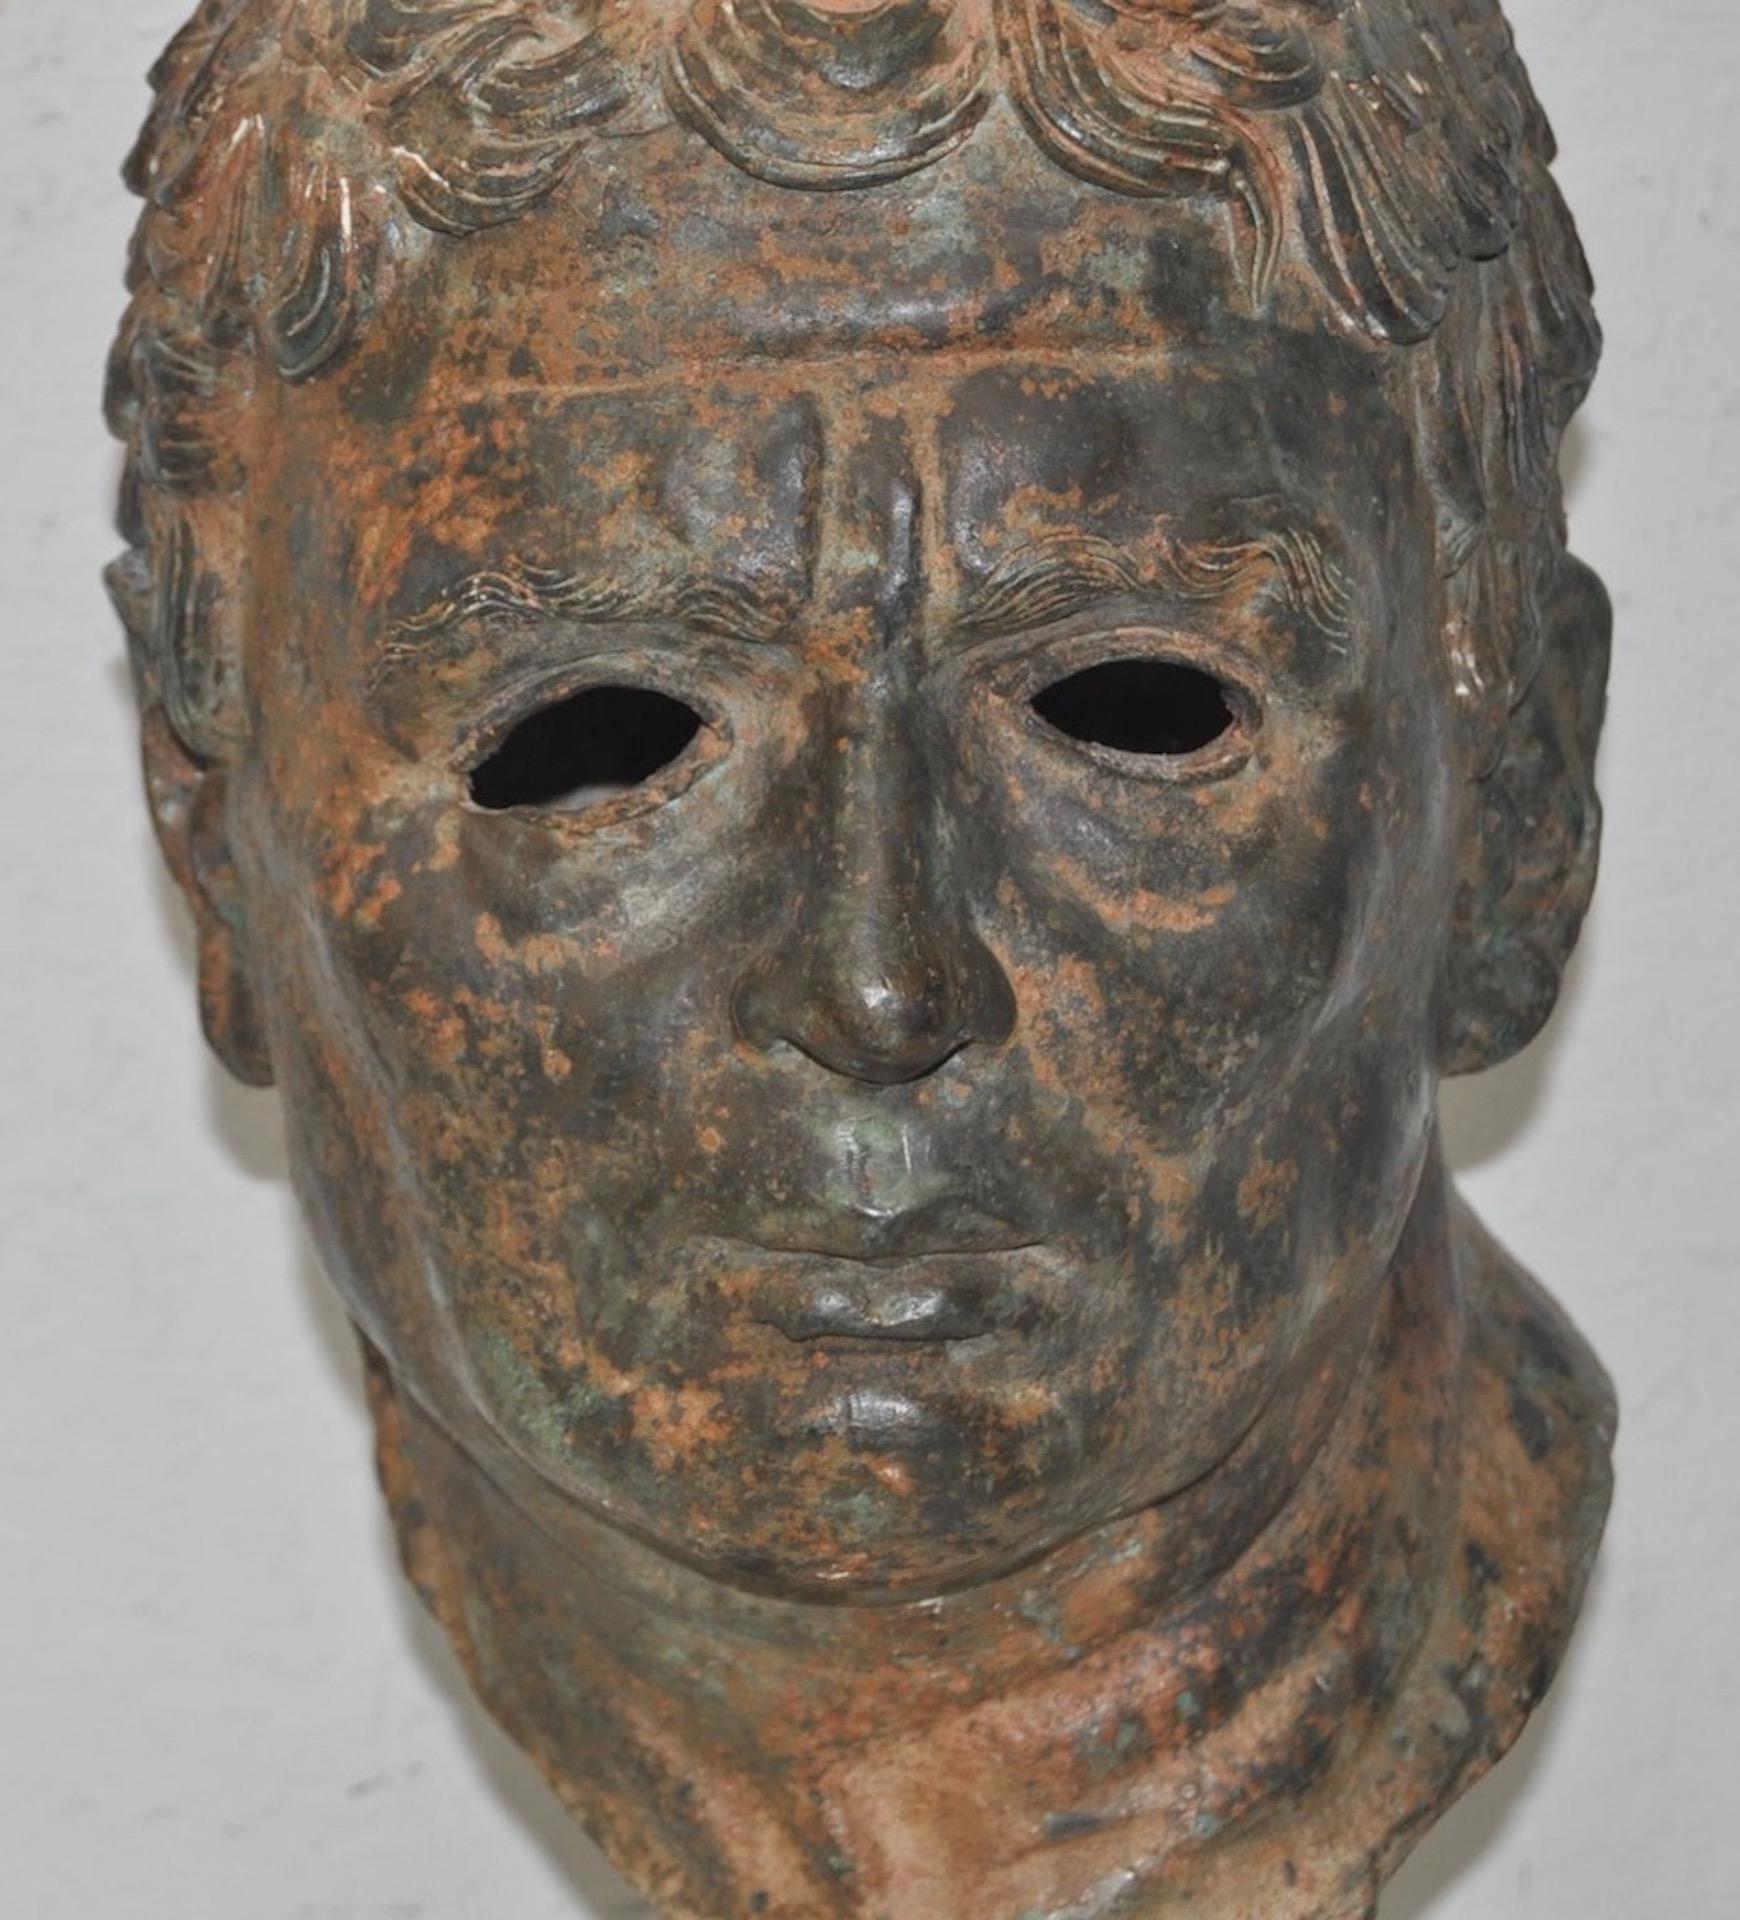 Fine 19th century bronze head after Greek antiquities

This is a remarkable bronze head in the style of Greek antiquities. 

A life-sized head of a young man with strong features and low cropped hair. The head sits on a stand and can be